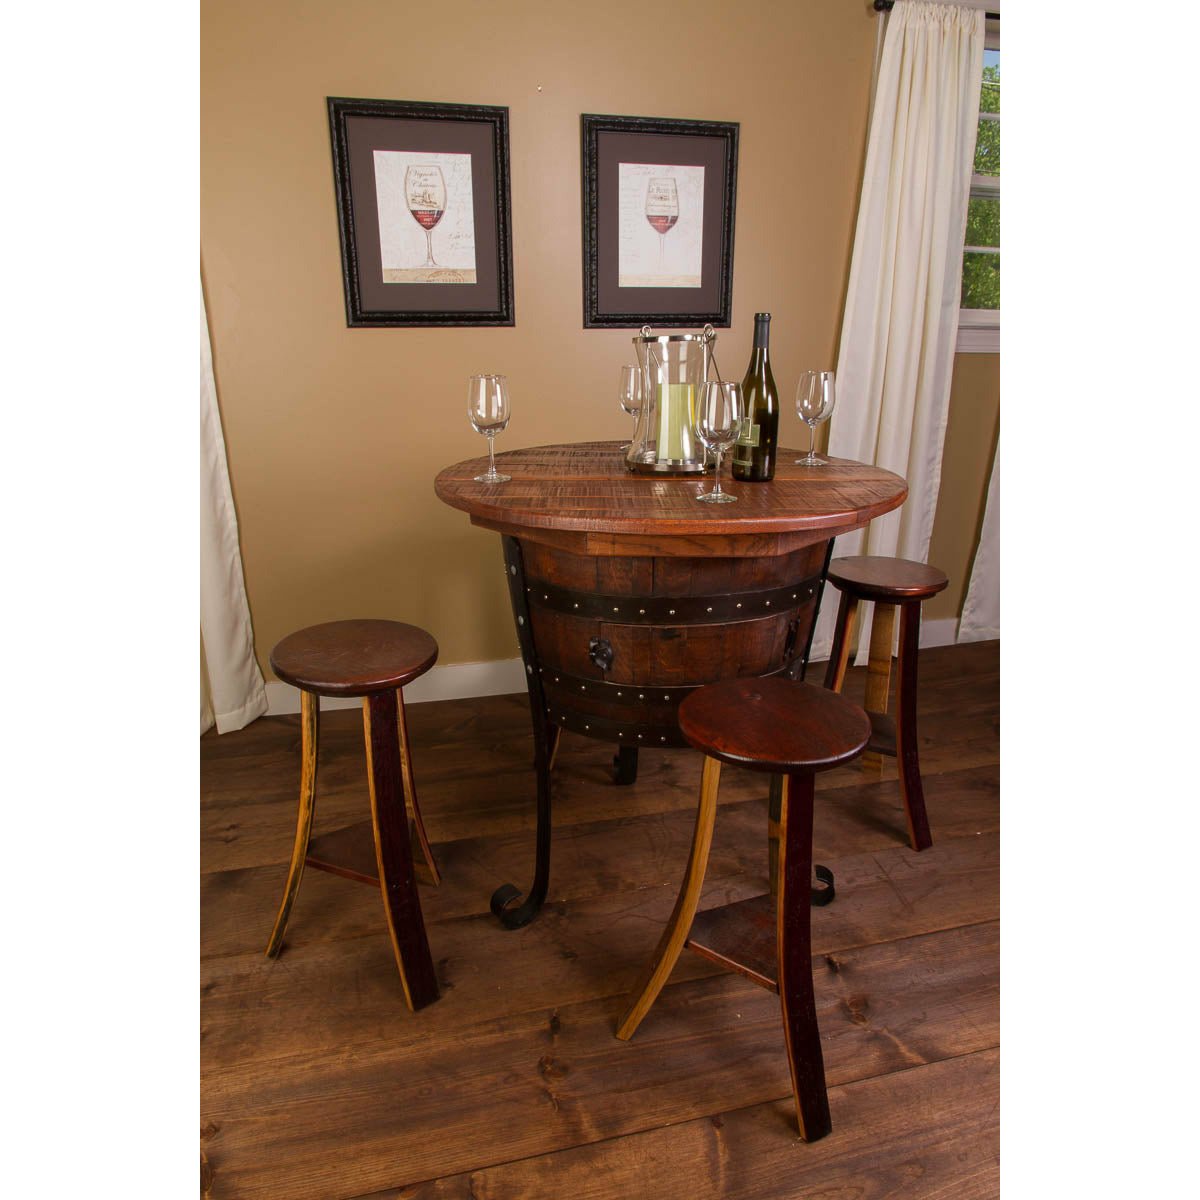 Napa East Old World Table with Cabinet Set - The Bar Design